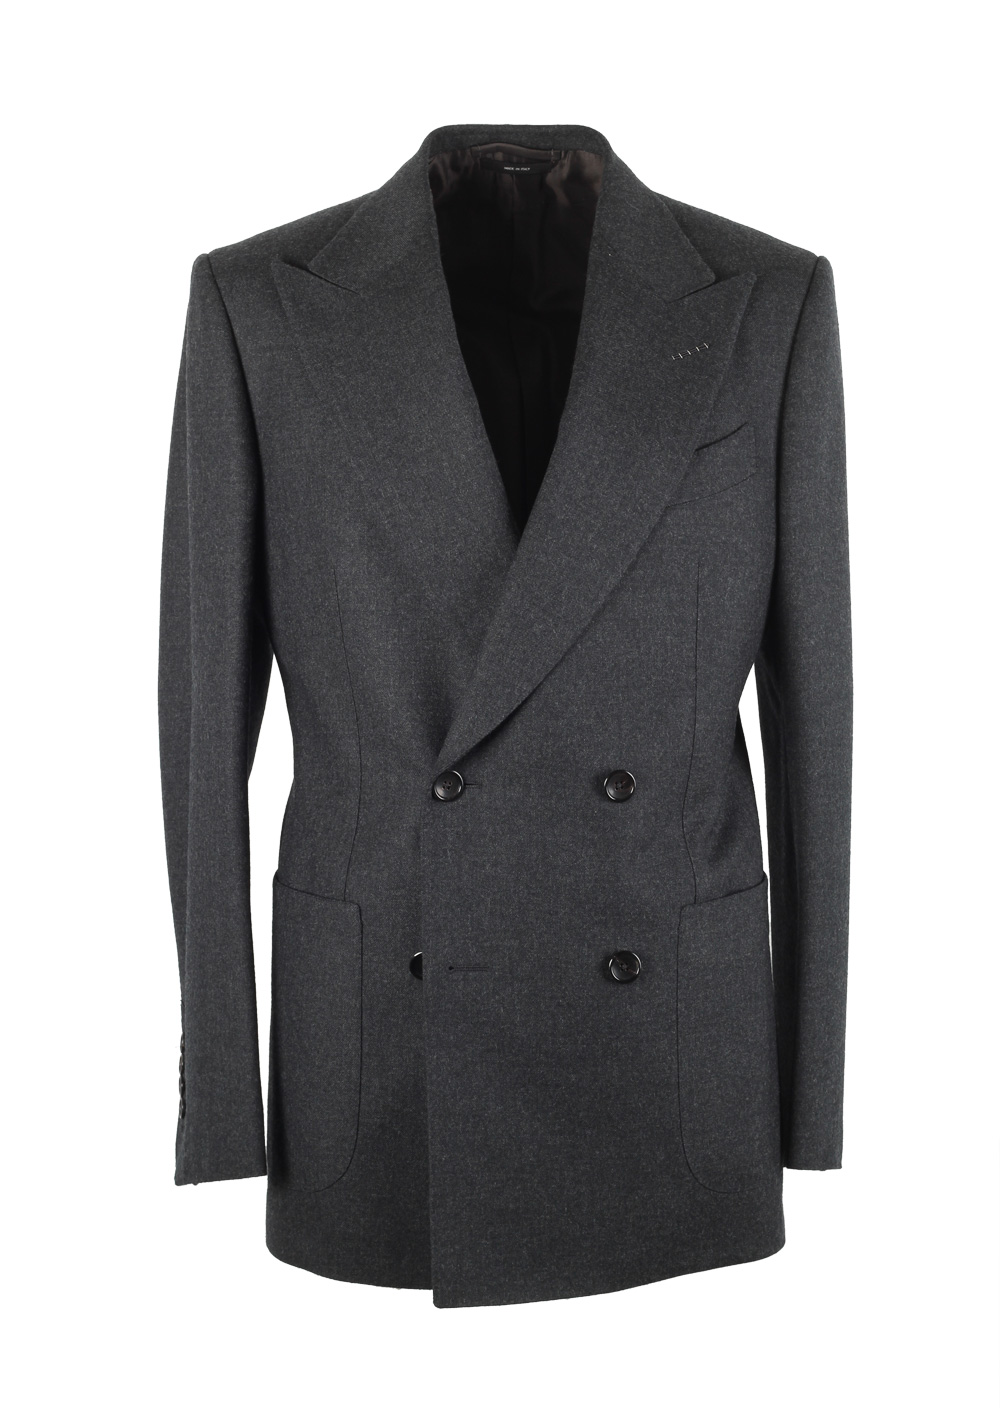 TOM FORD Shelton Double Breasted Gray Suit Size 46 / 36R U.S. Wool ...